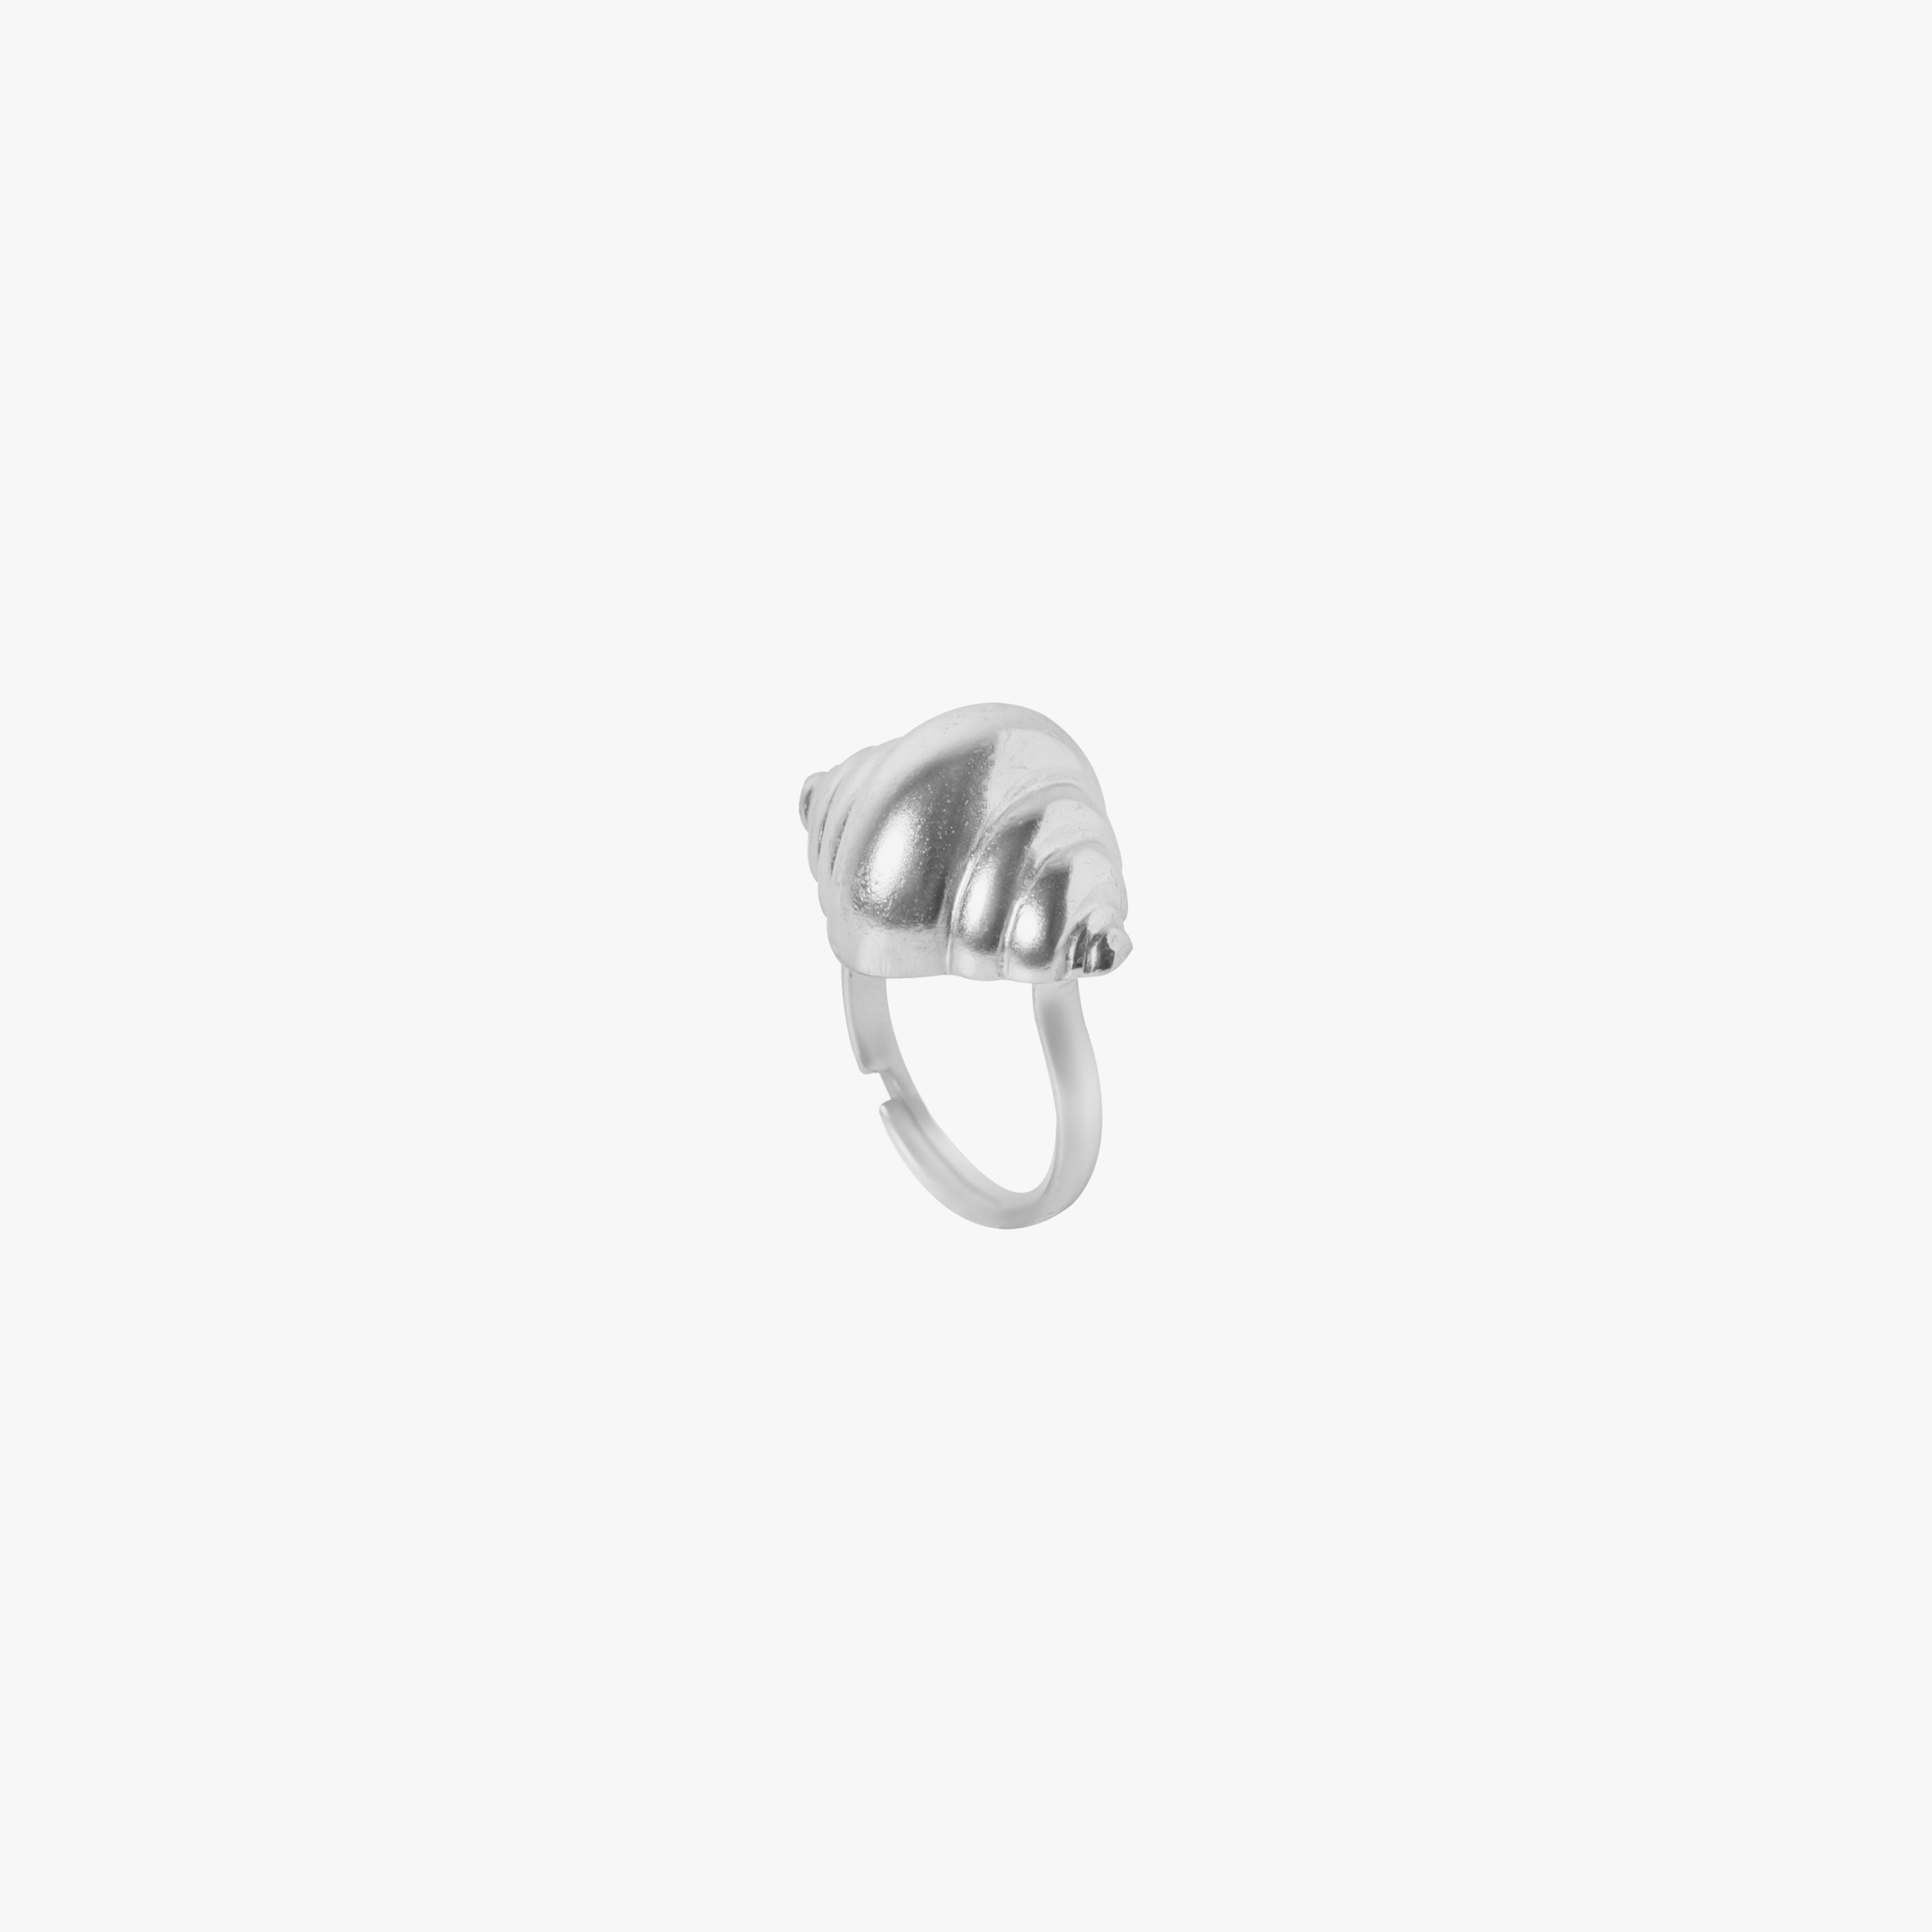 TULIP SHELL RING SILVER TONE , a product by Equiivalence